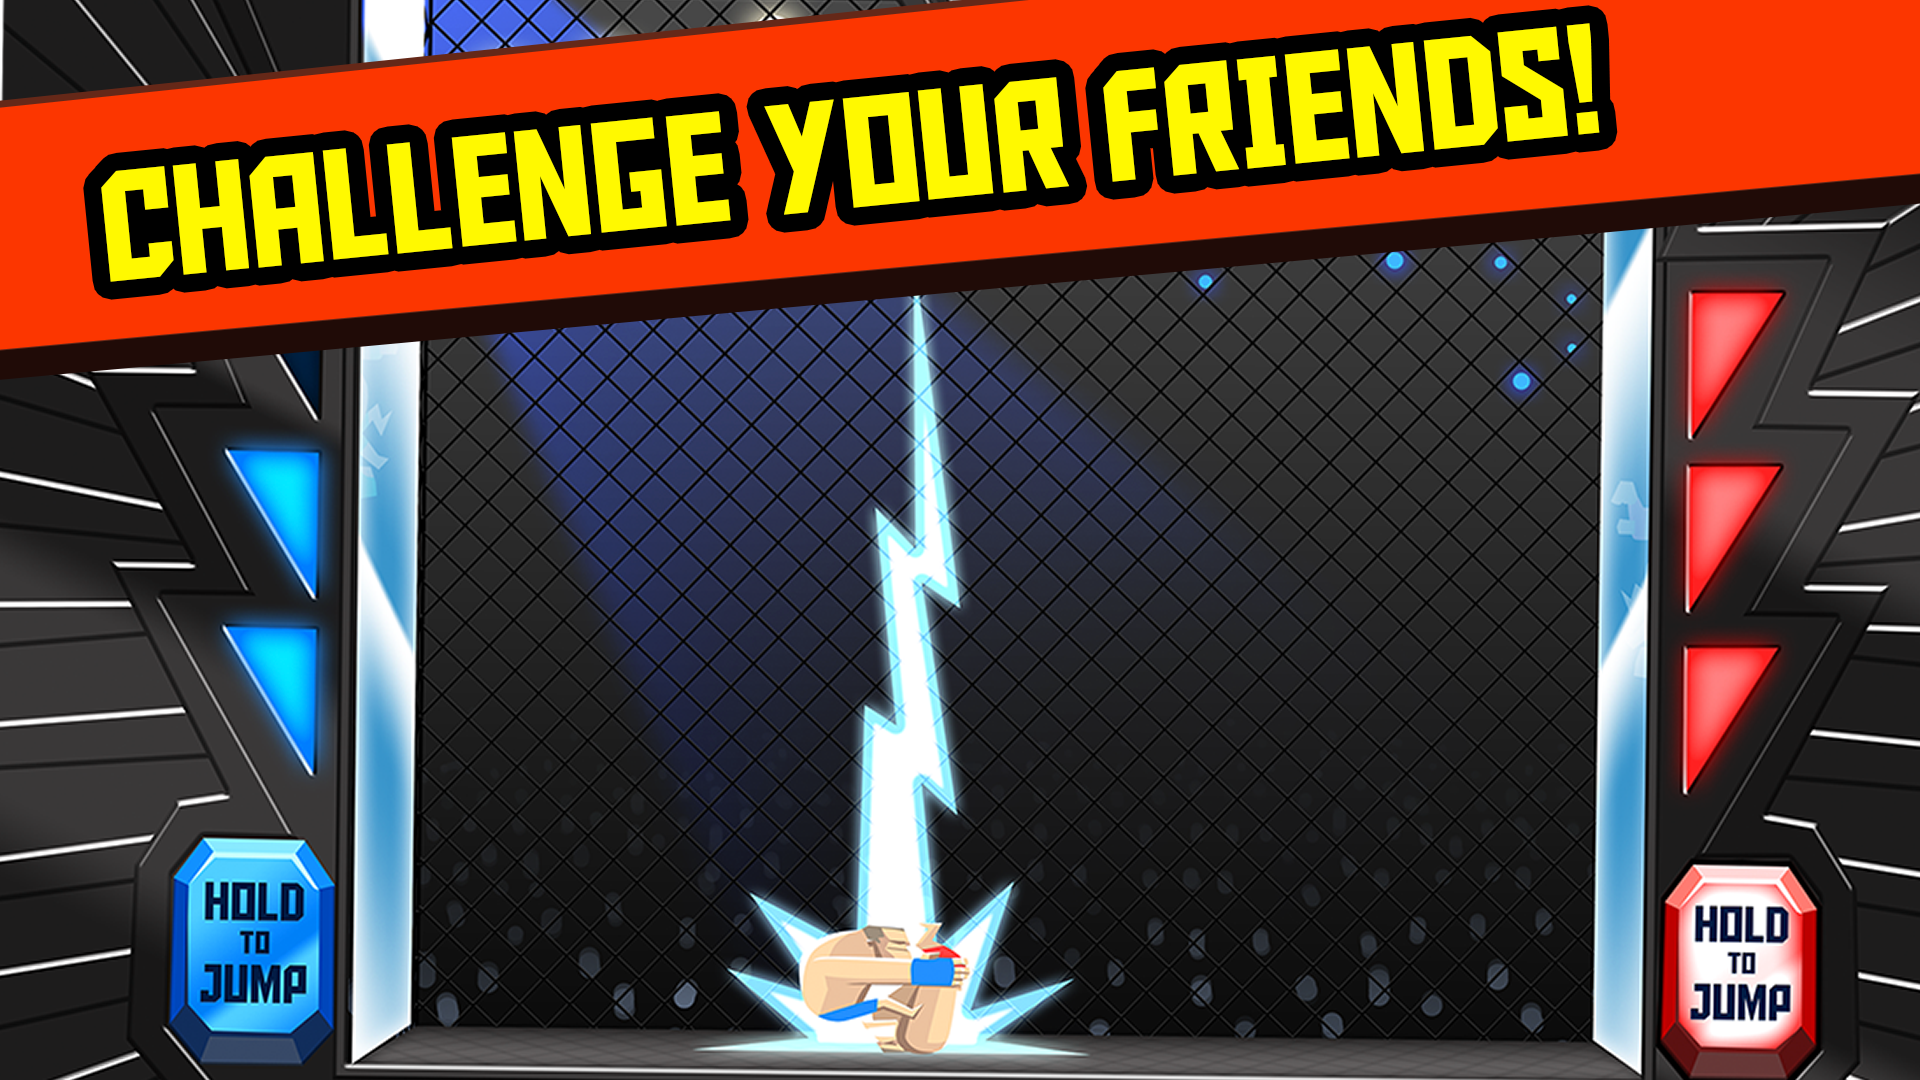 Android application UFB: 2 Player Game Fighting screenshort